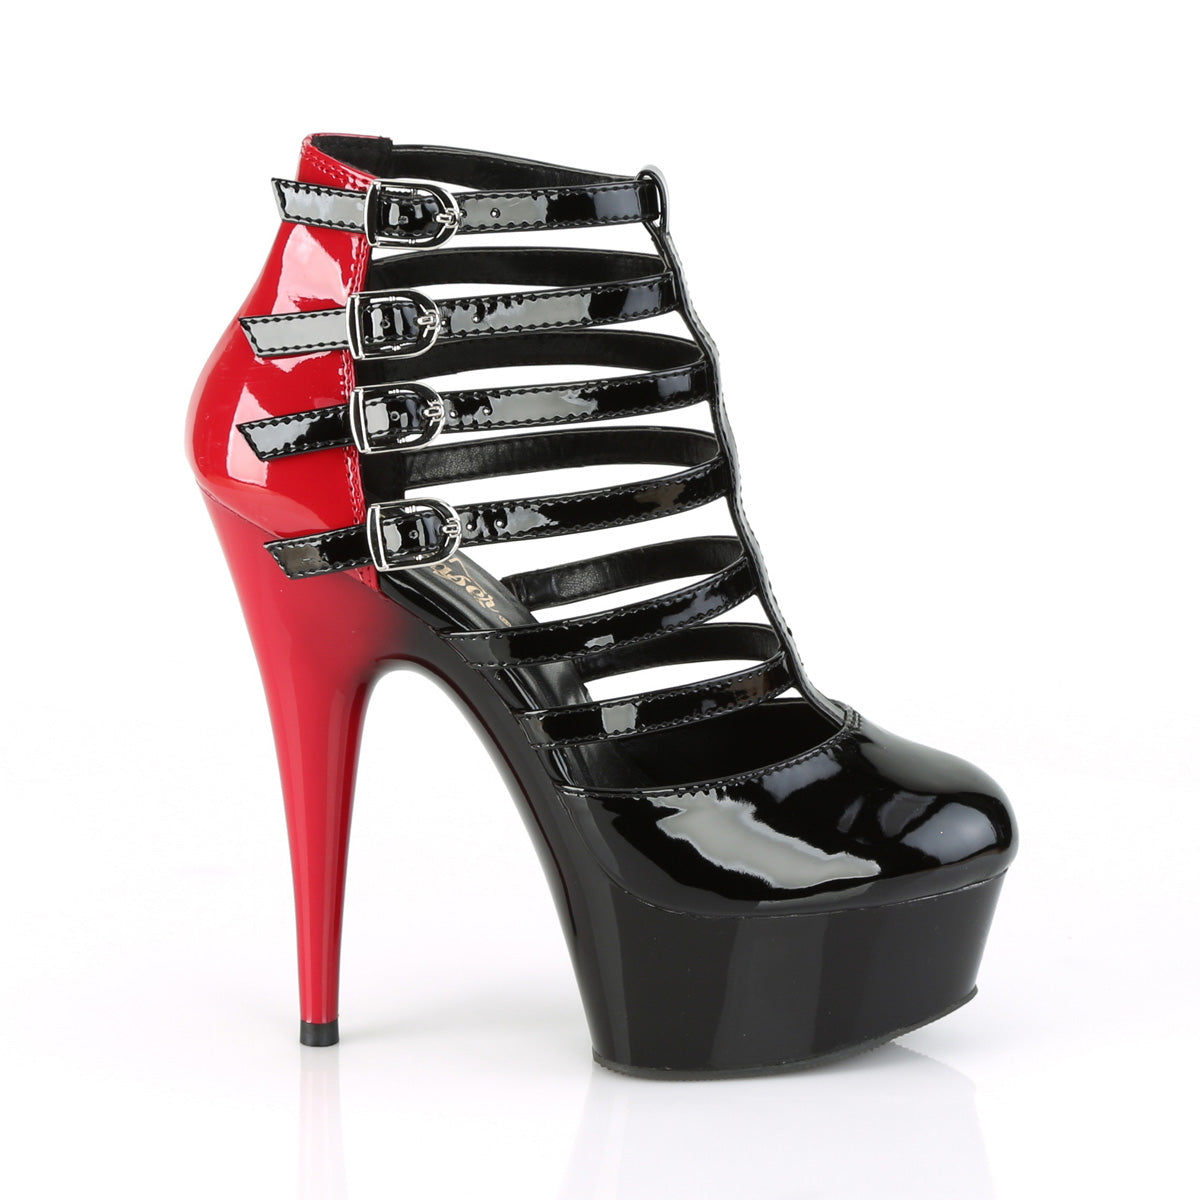 DELIGHT-695 6 Inch Heel Black and Red Pole Dancing Platforms-Pleaser- Sexy Shoes Fetish Heels